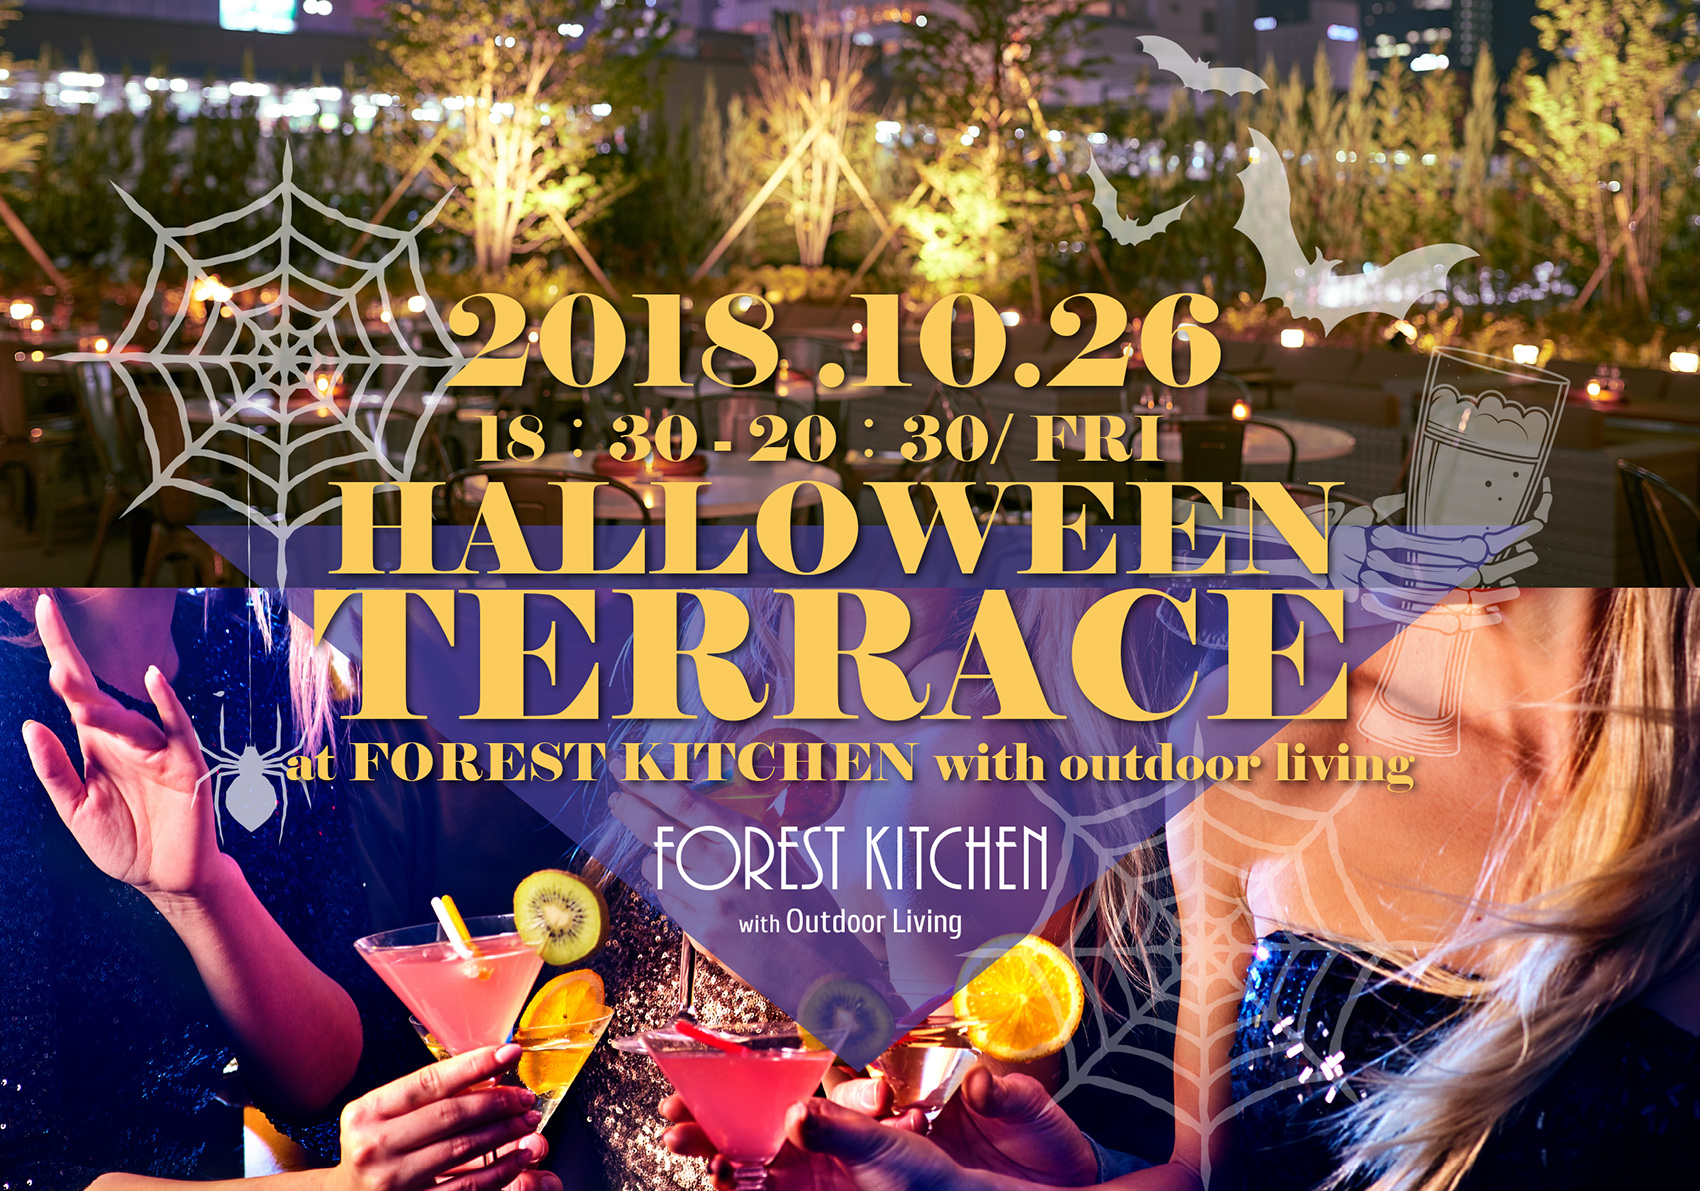 Halloween Terrace 2018 at FOREST KITCHEN with Outdoor Living